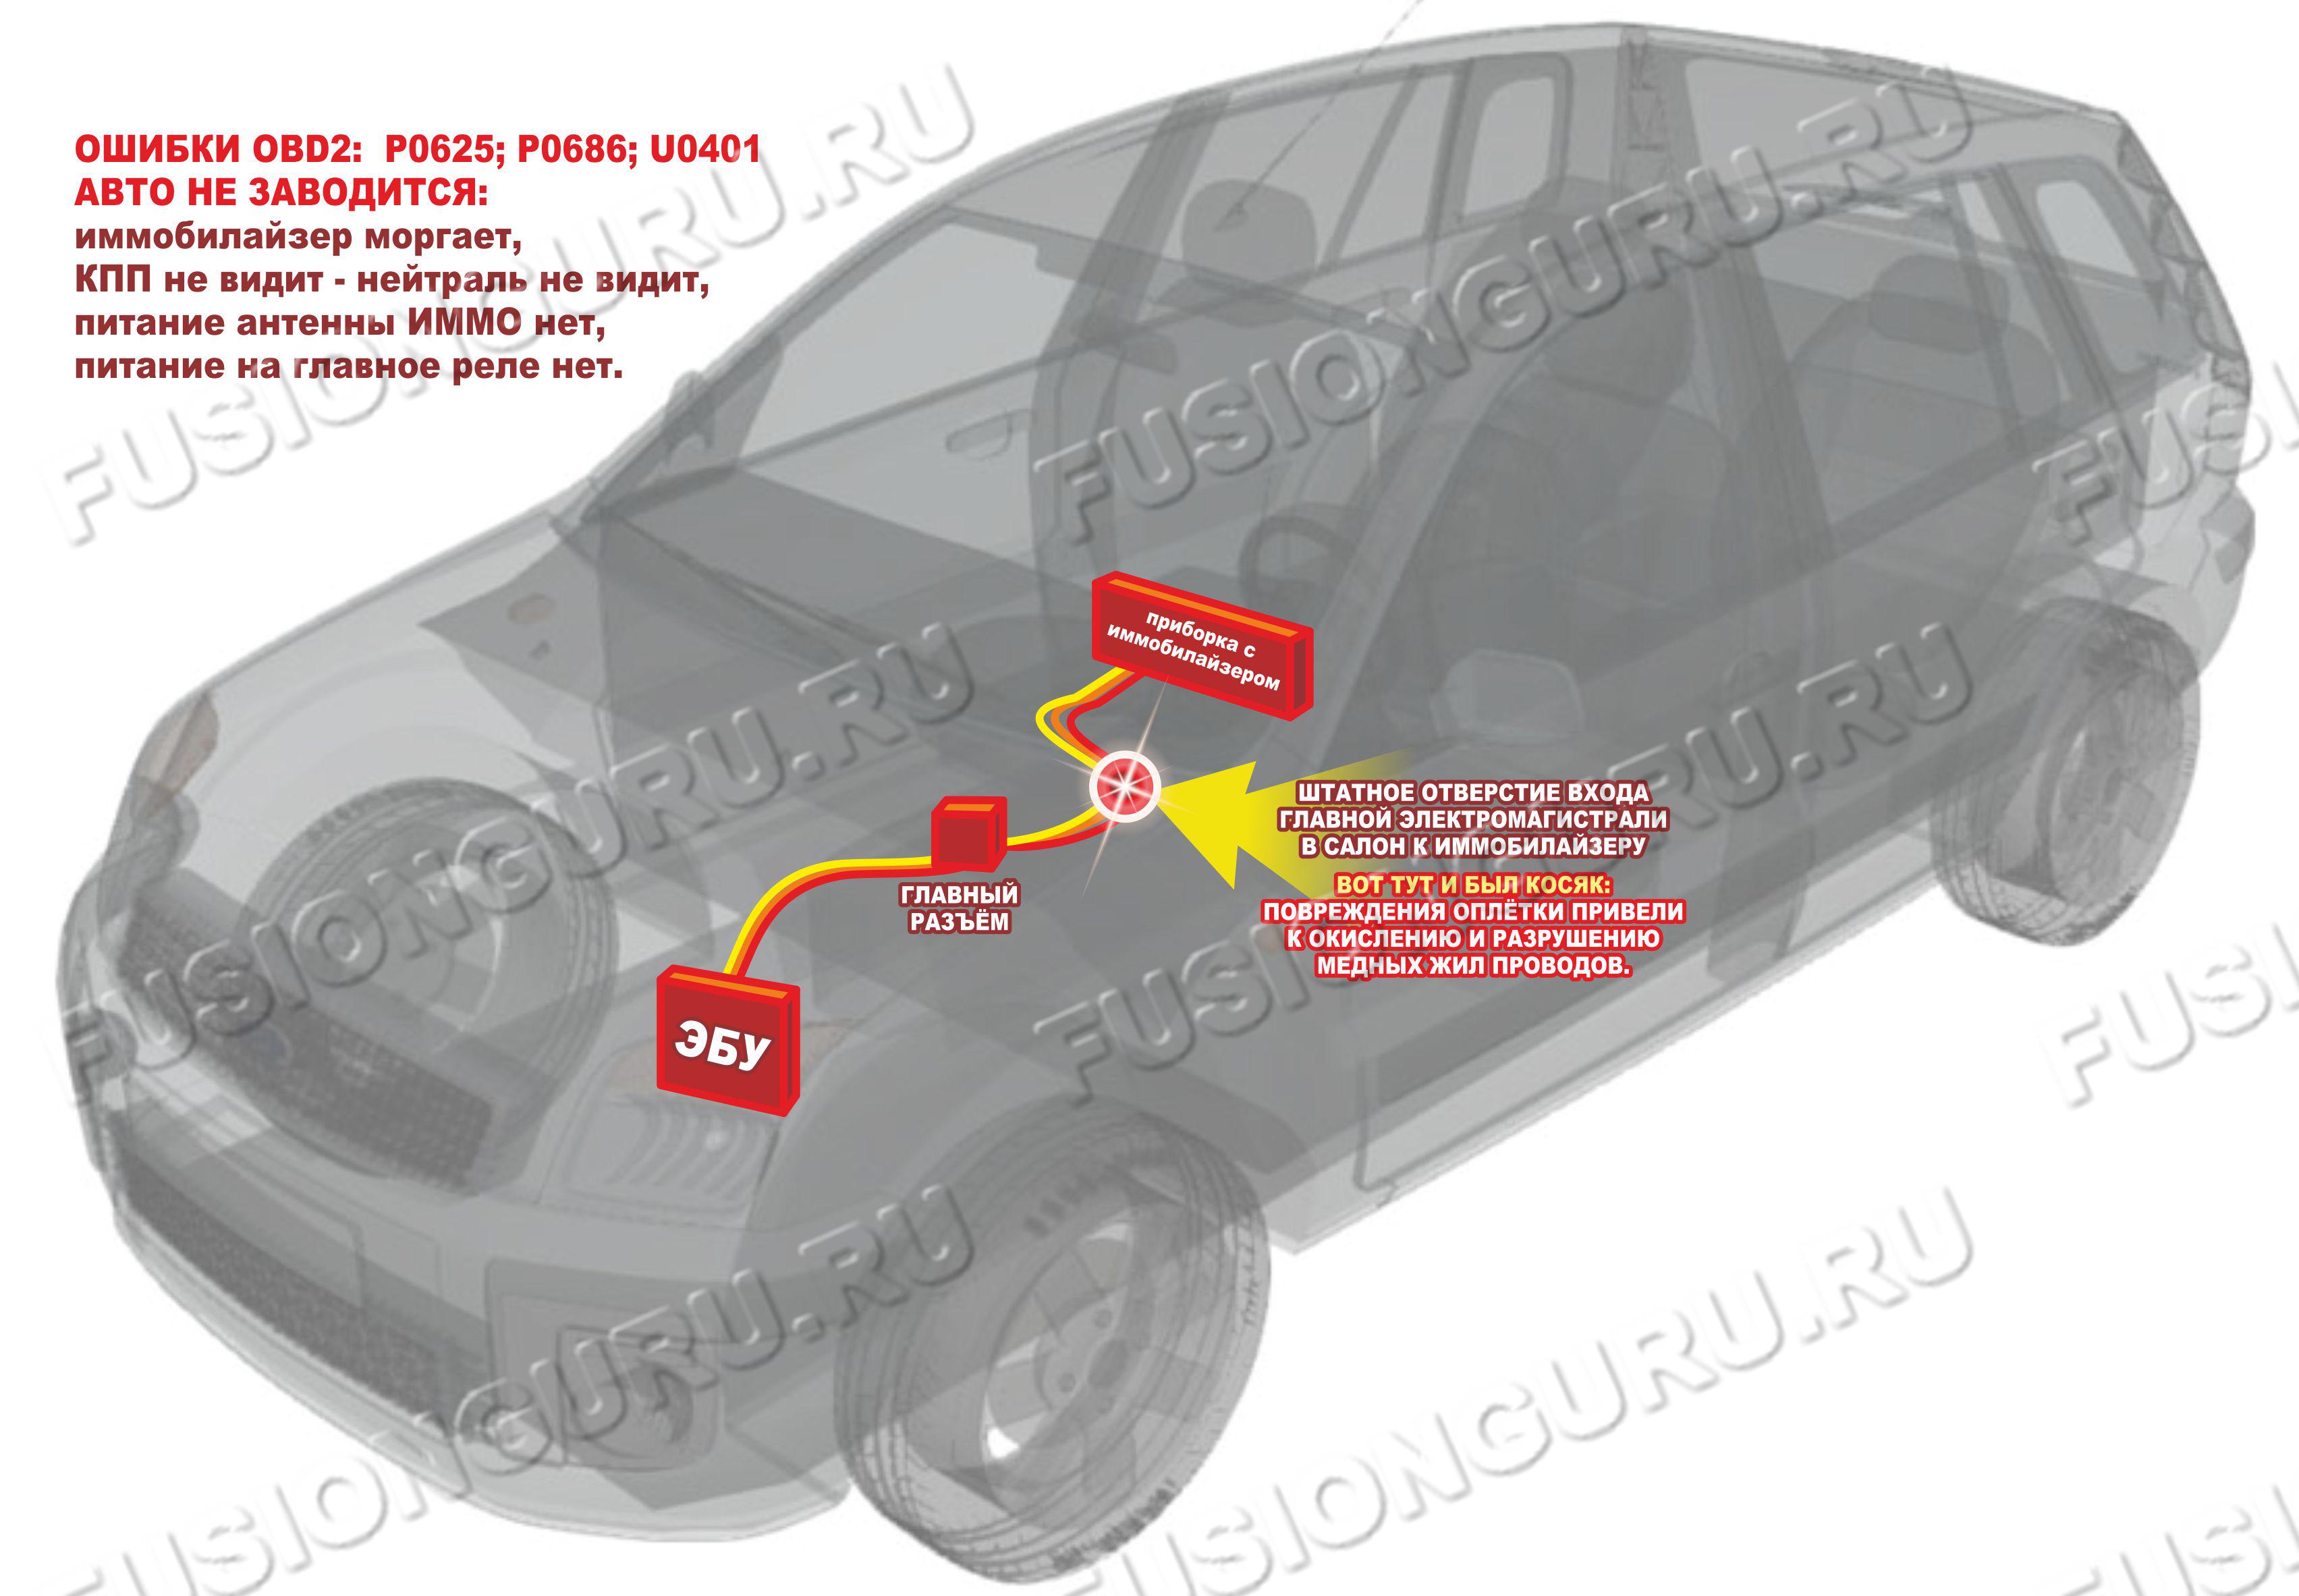 Ford Transit ABS fault U0401 invalid data from ecu